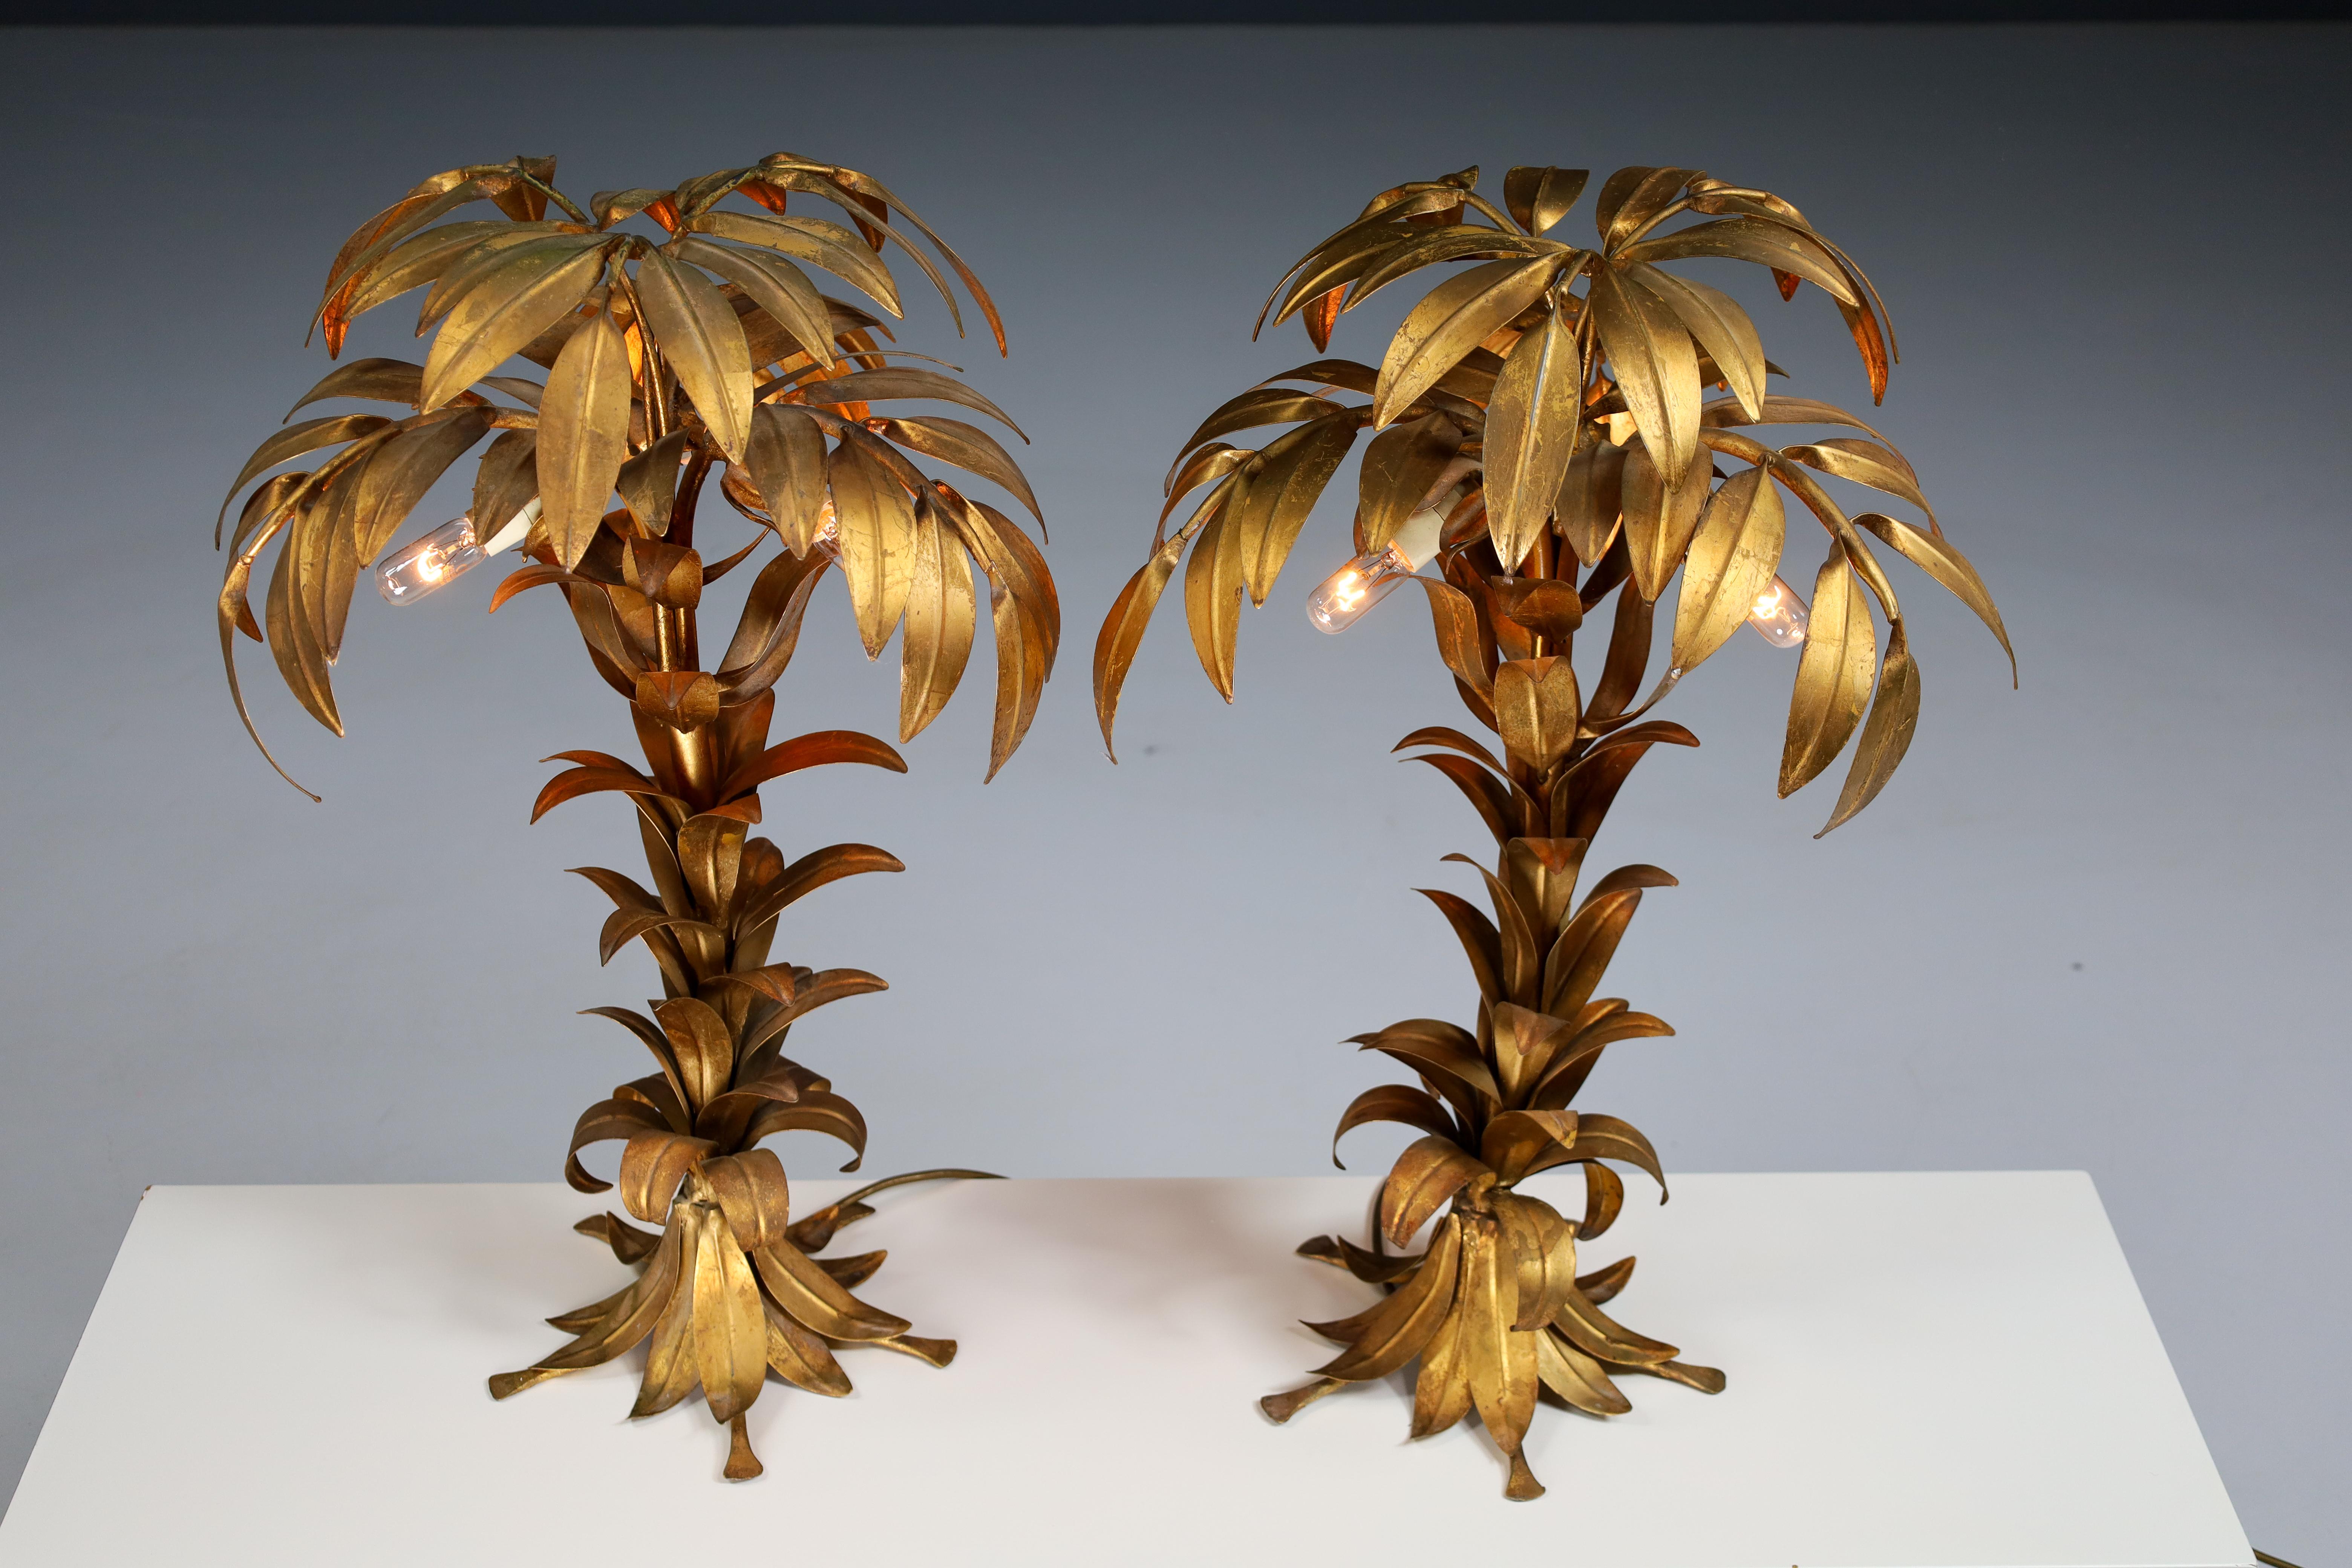 Pair of two Gilt Palm Tree Tables Lamp by Hans Kögl, Germay 1970s For Sale 1